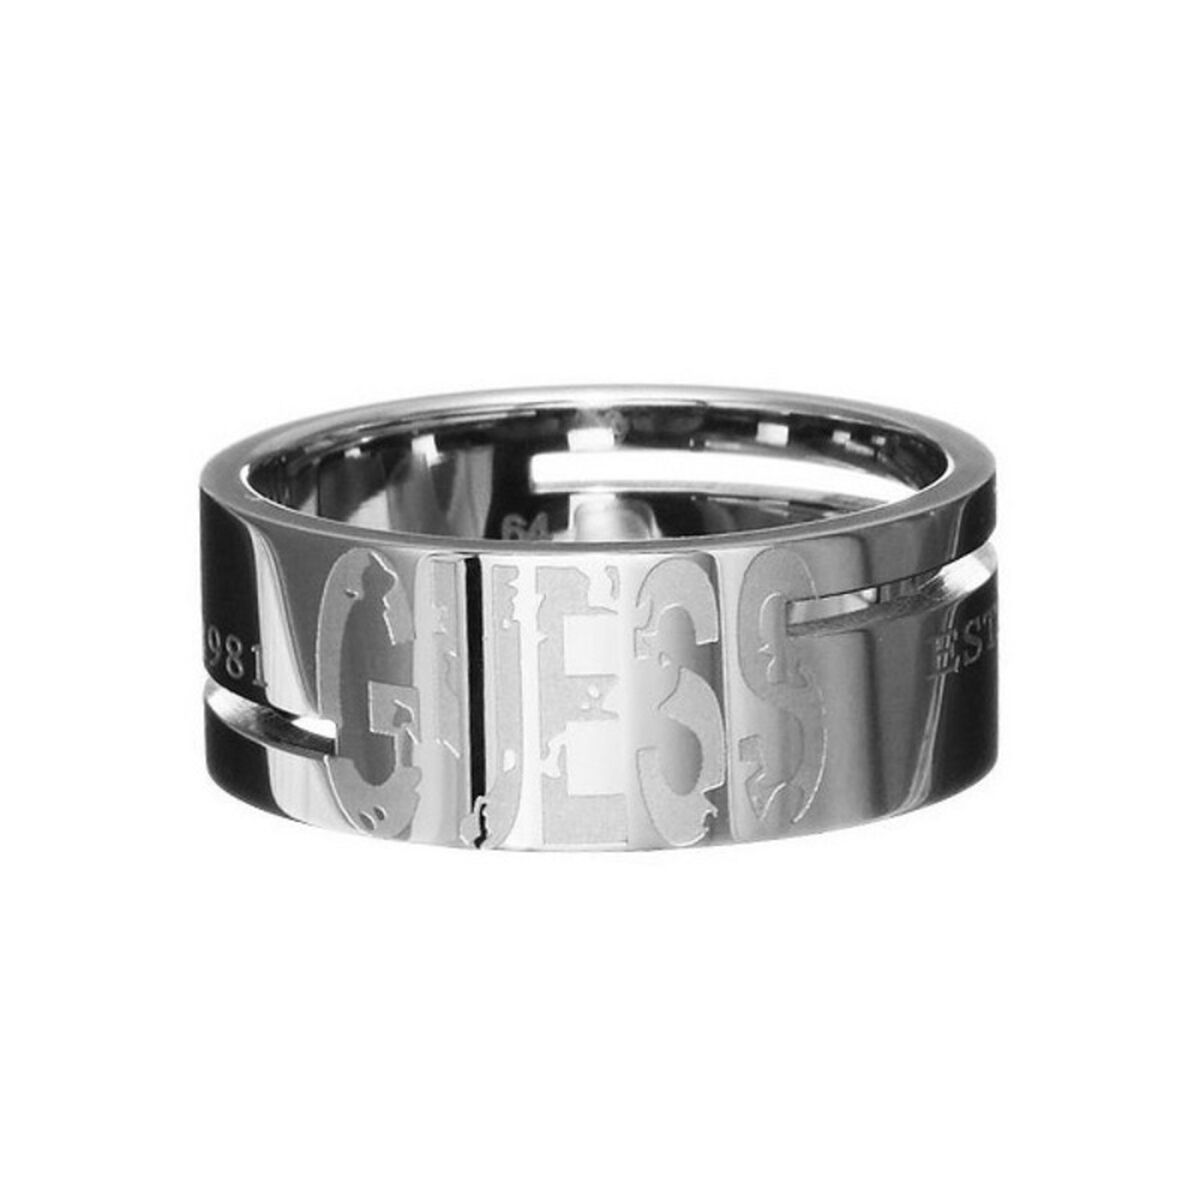 Bague Homme Guess UMR11101-64 (20,5 mm) (Taille 20,5 mm)